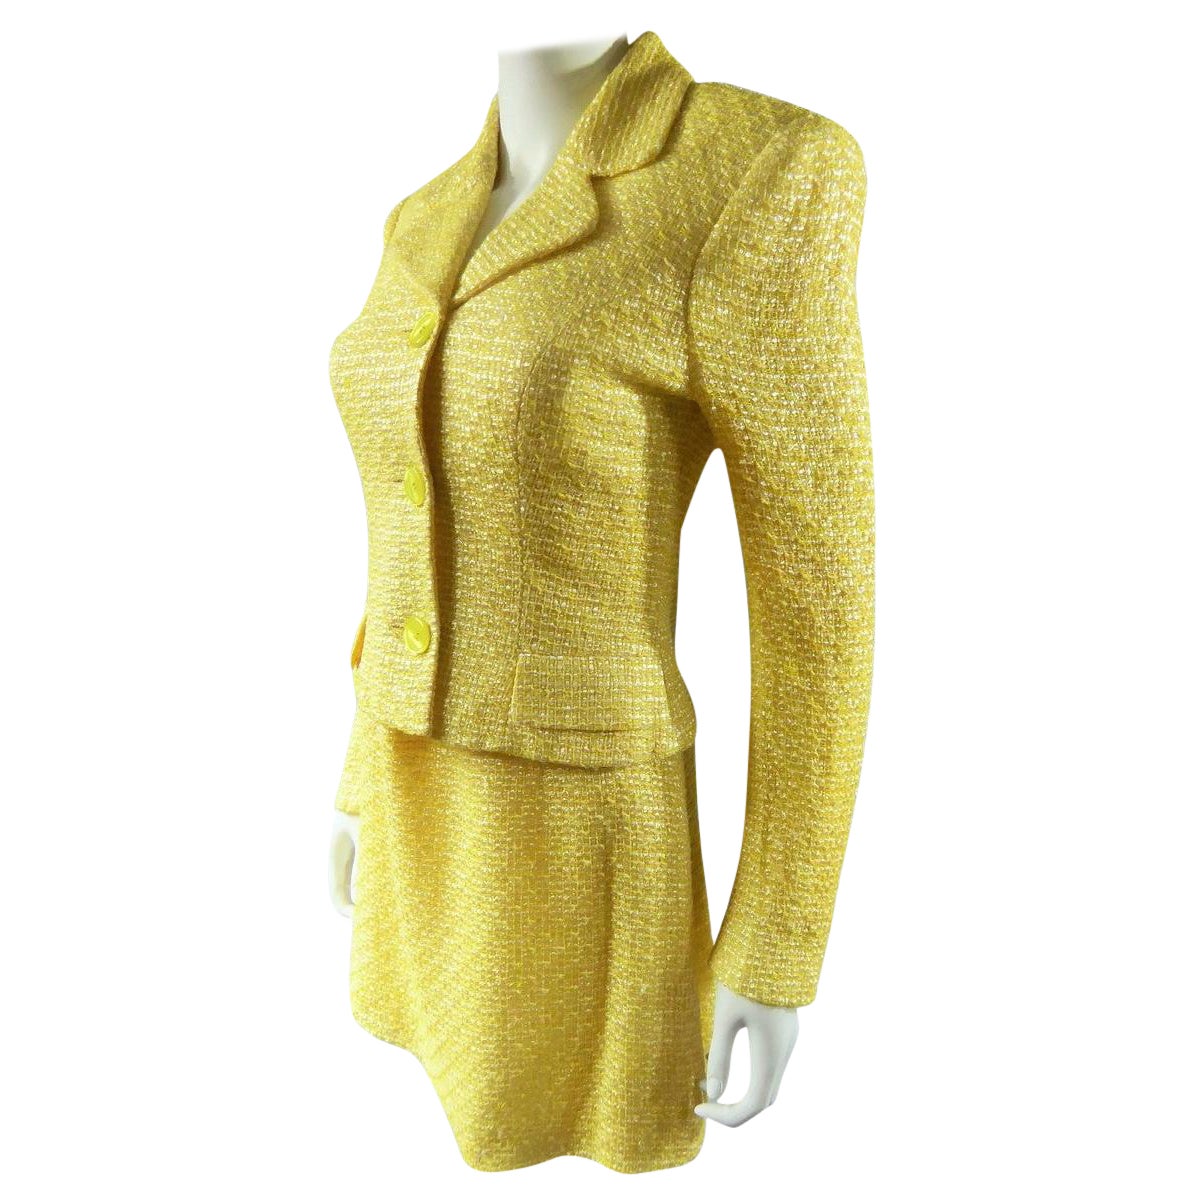  A Versace Yellow Dress and Jacket, Circa 1990 For Sale